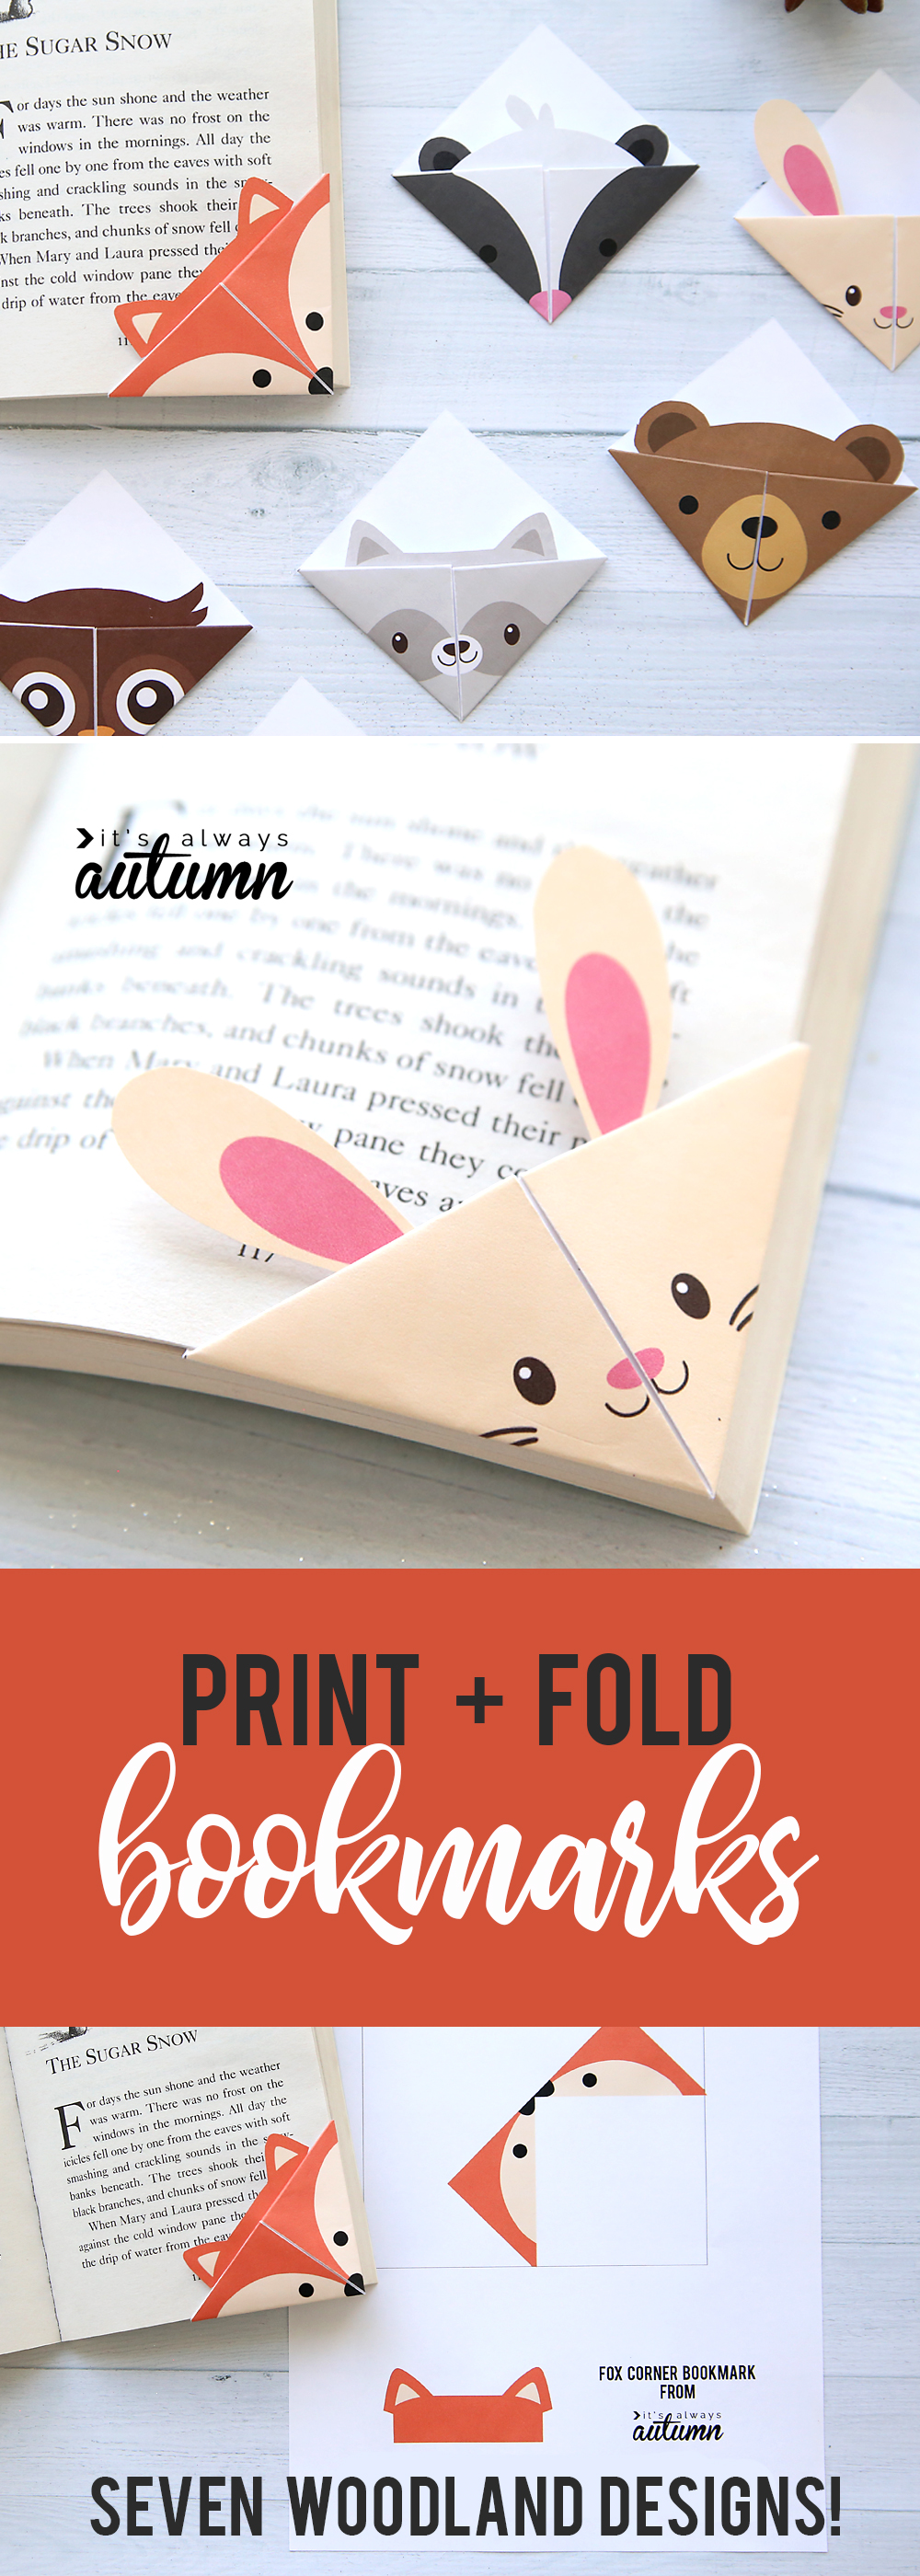 How To Make Paper Bookmarks Online